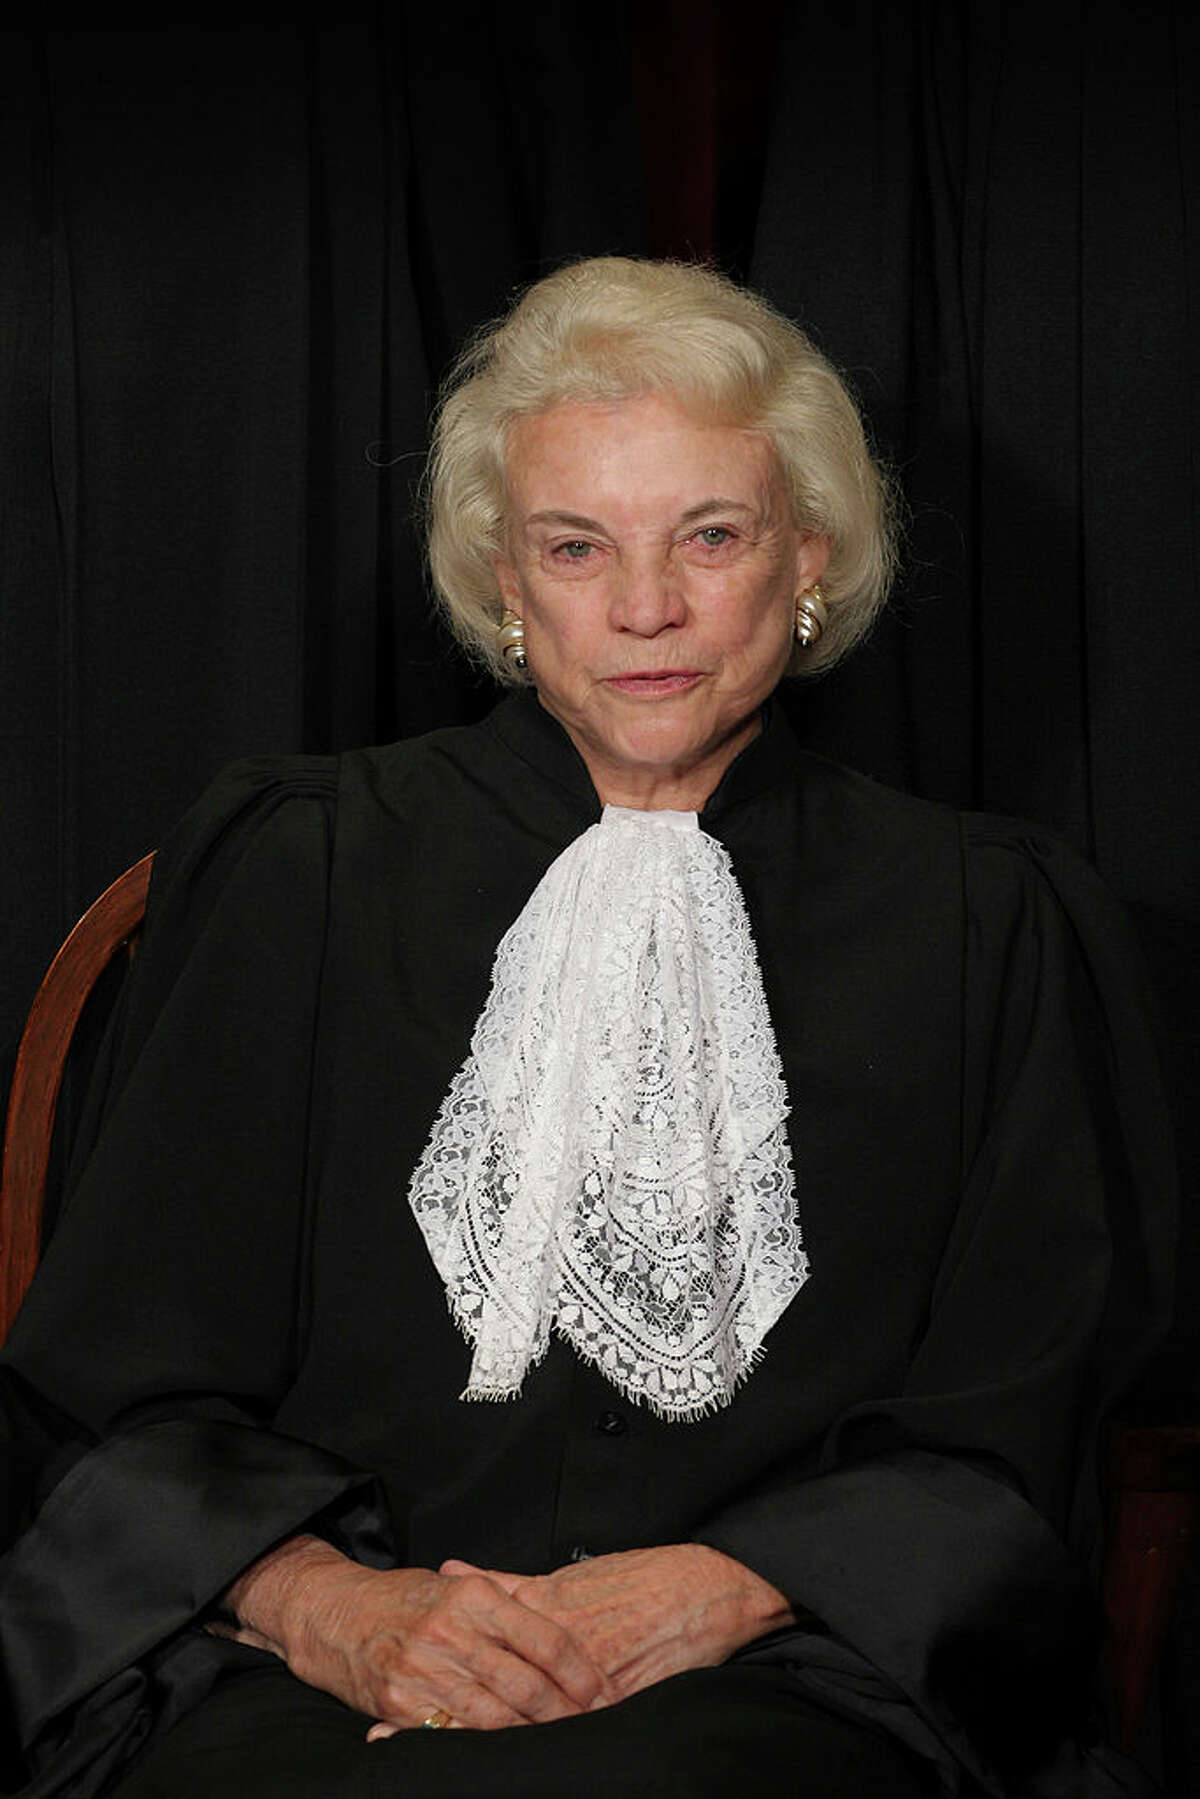 Commentary The era of Sandra Day O'Connor is behind us